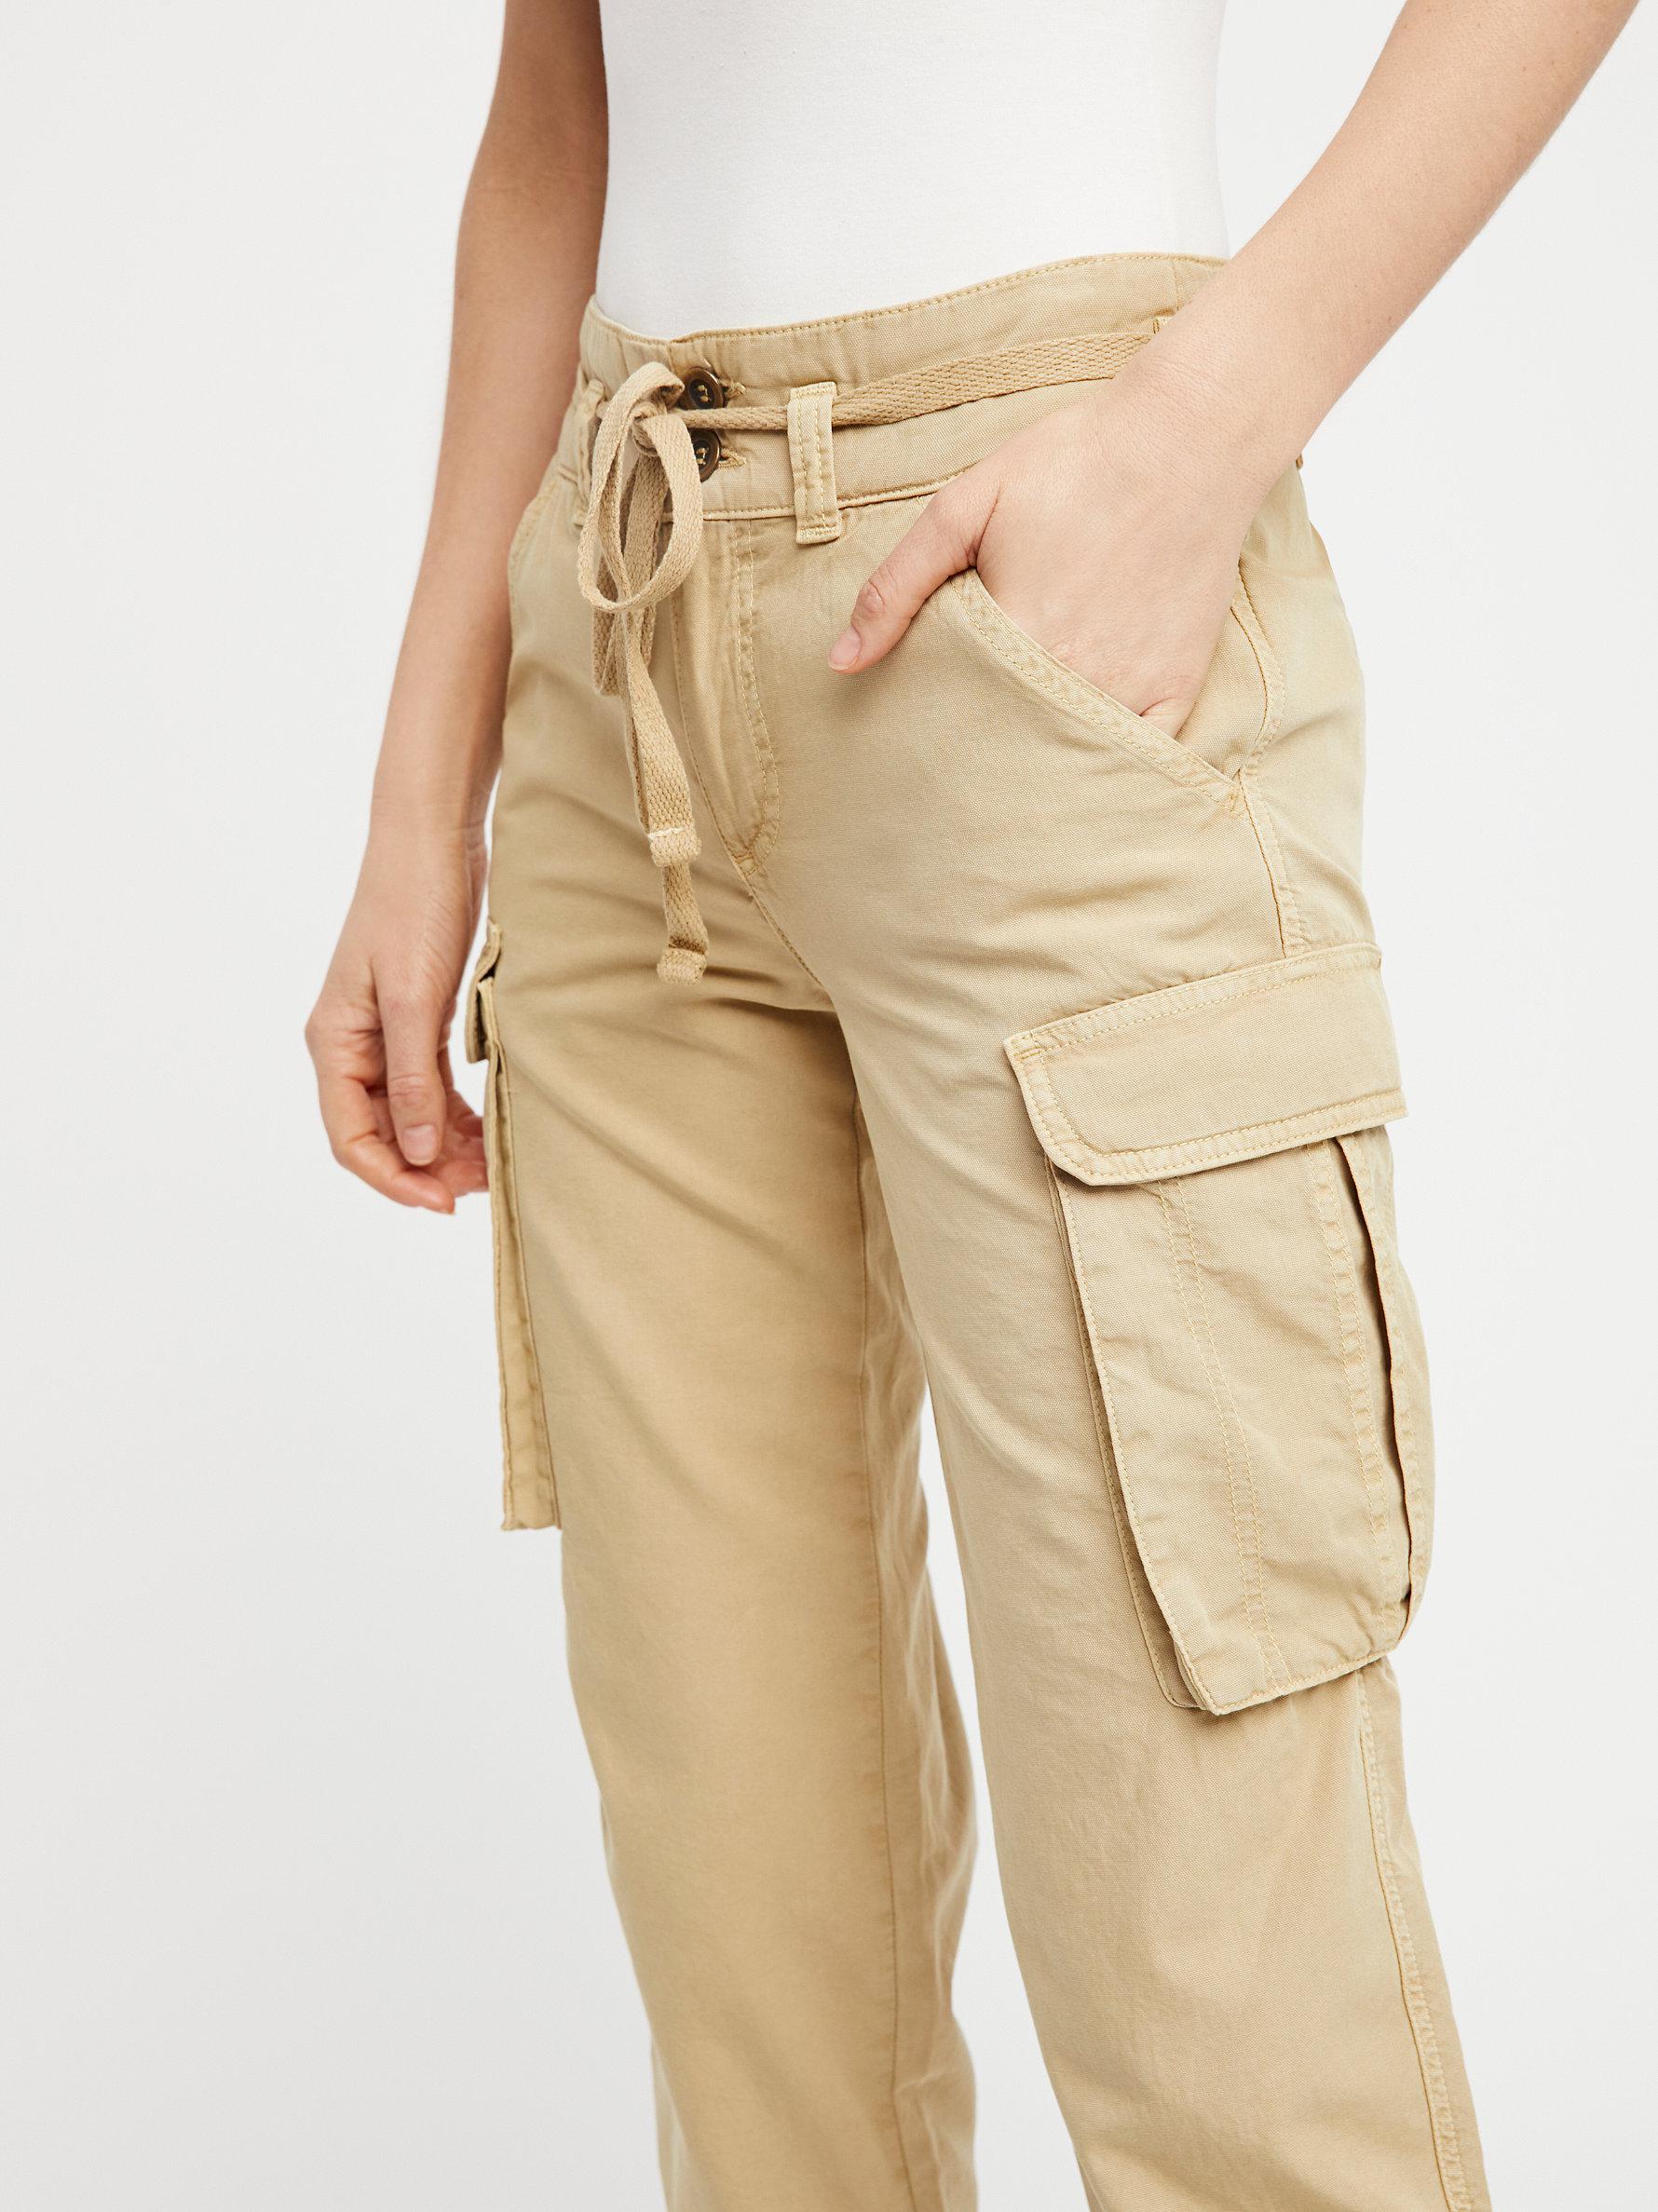 Lyst - Free People Desert Cargo Pant in Natural